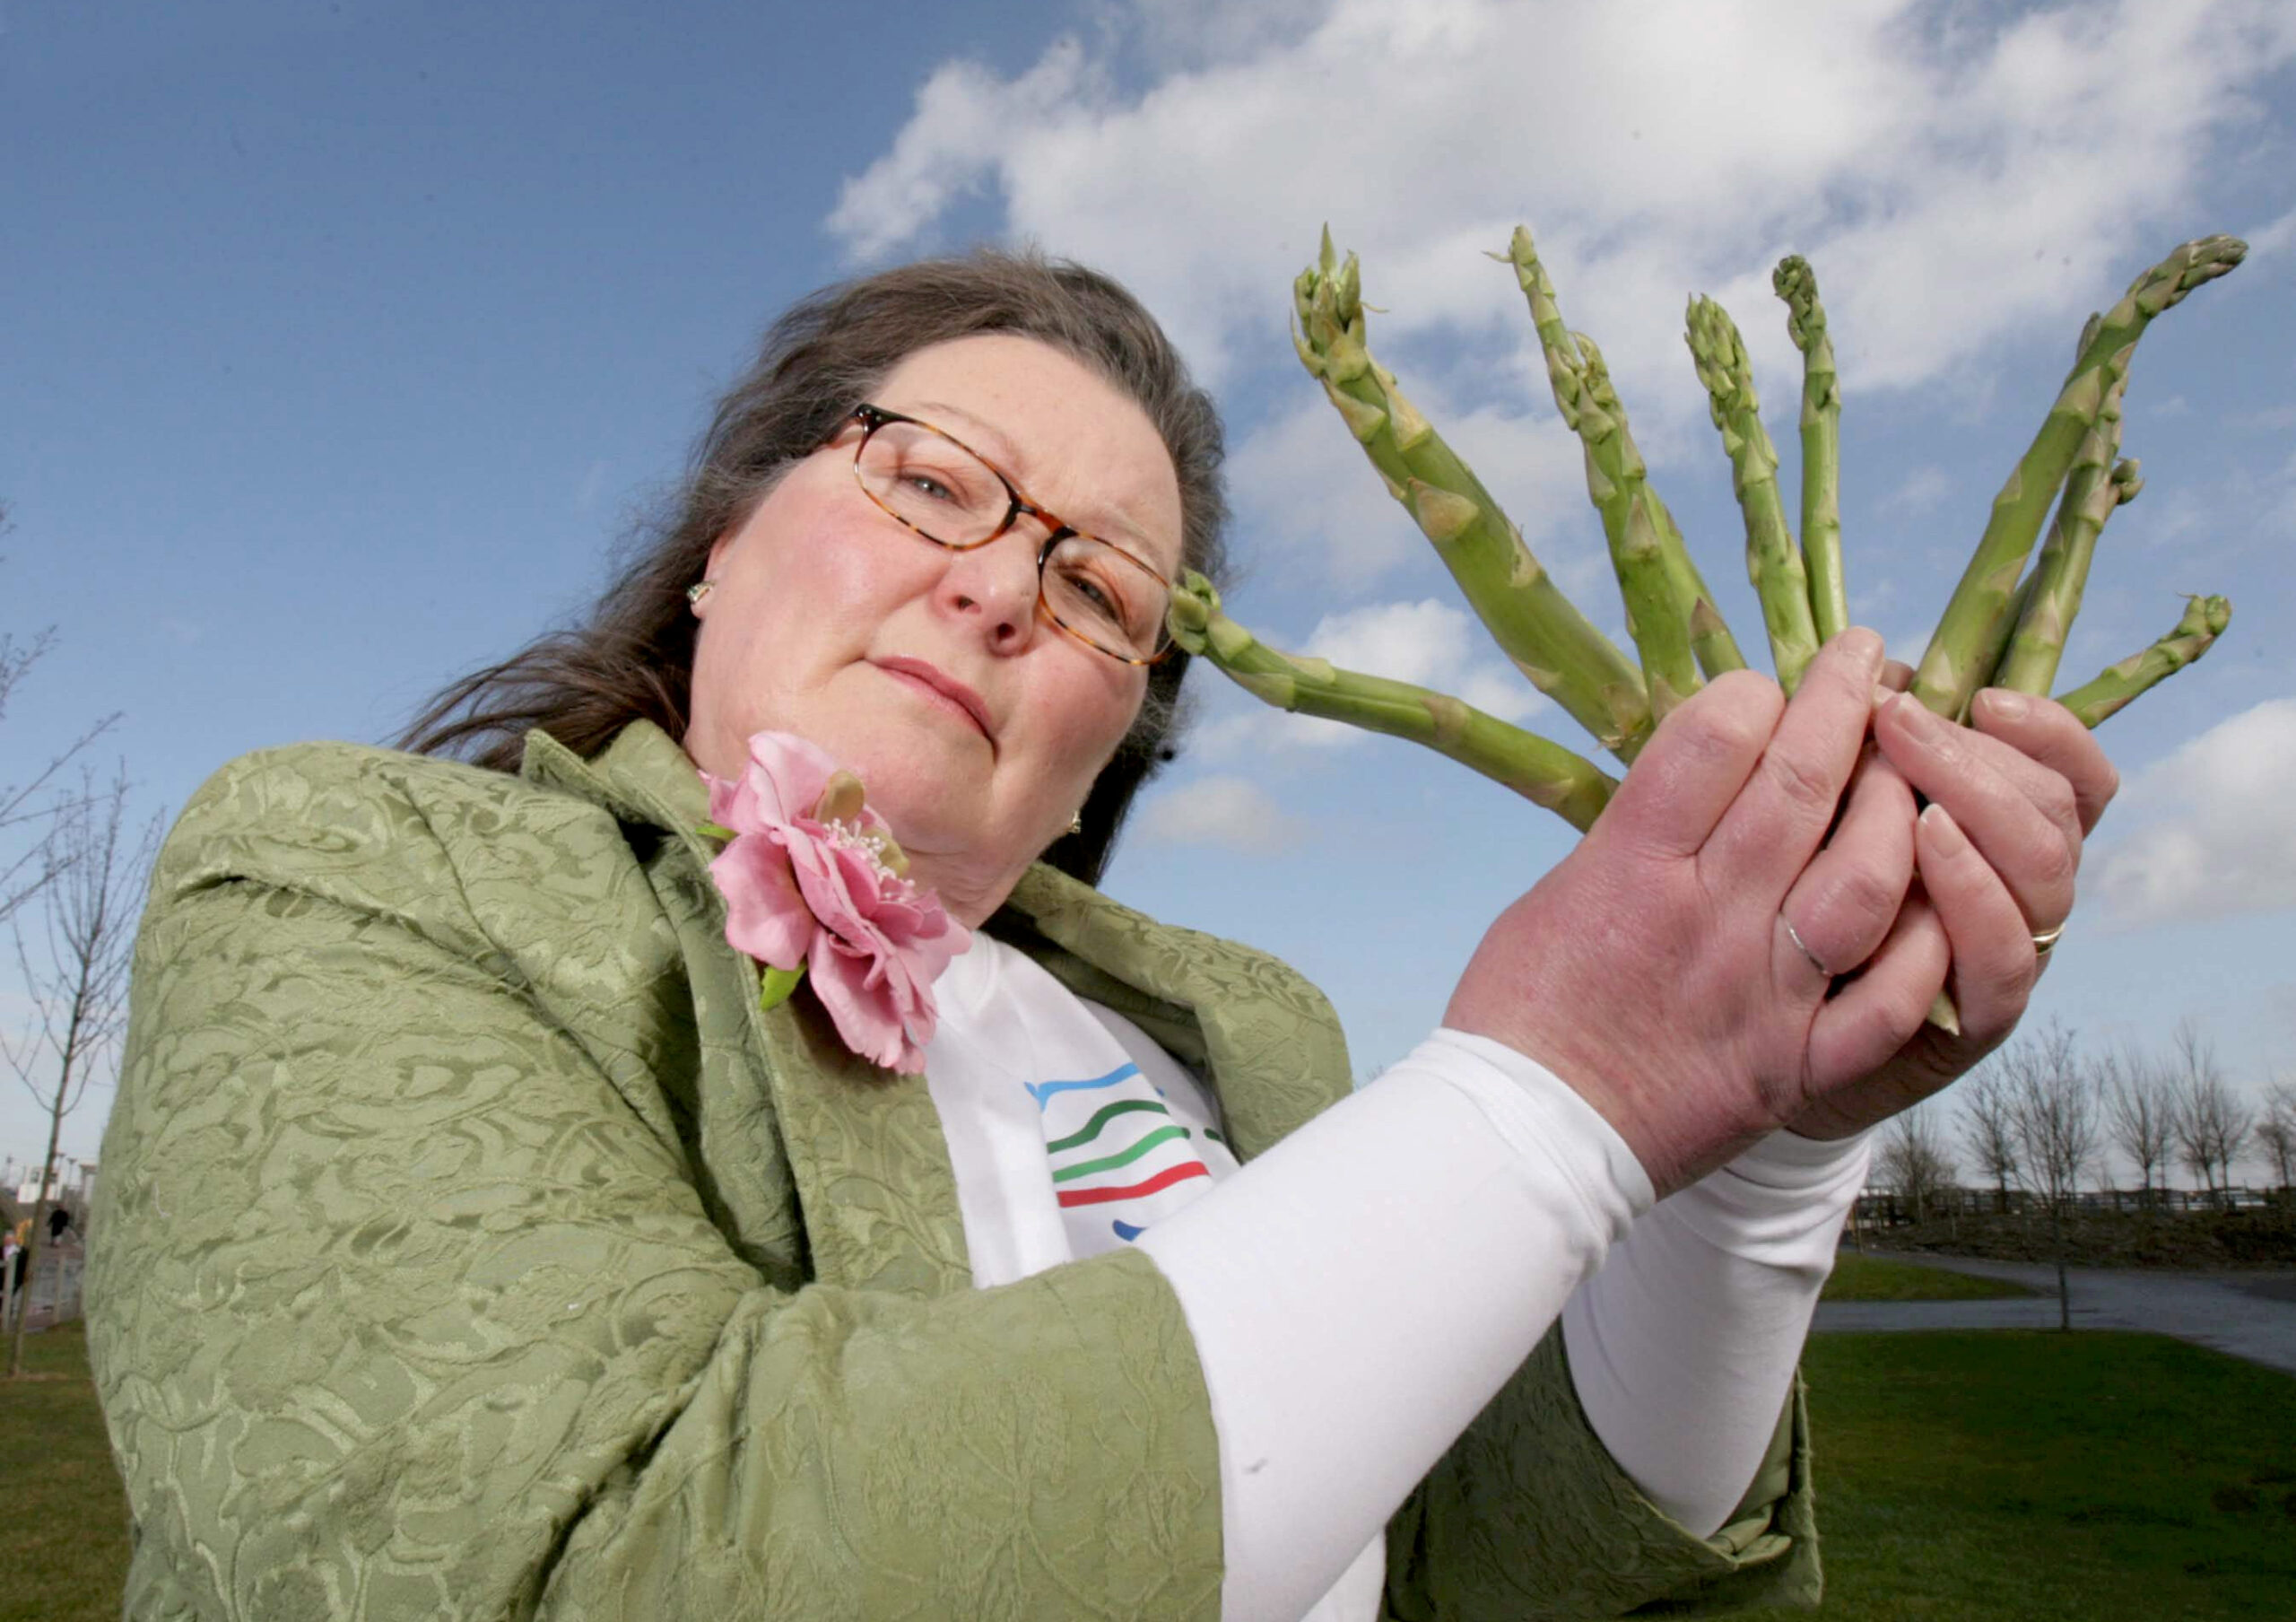 A fortune teller dubbed Mystic Veg who predicts the future using asparagus has revealed the UK's next Prime Minister will be Ben Wallace. (Jon Mills, SWNS/Zenger)